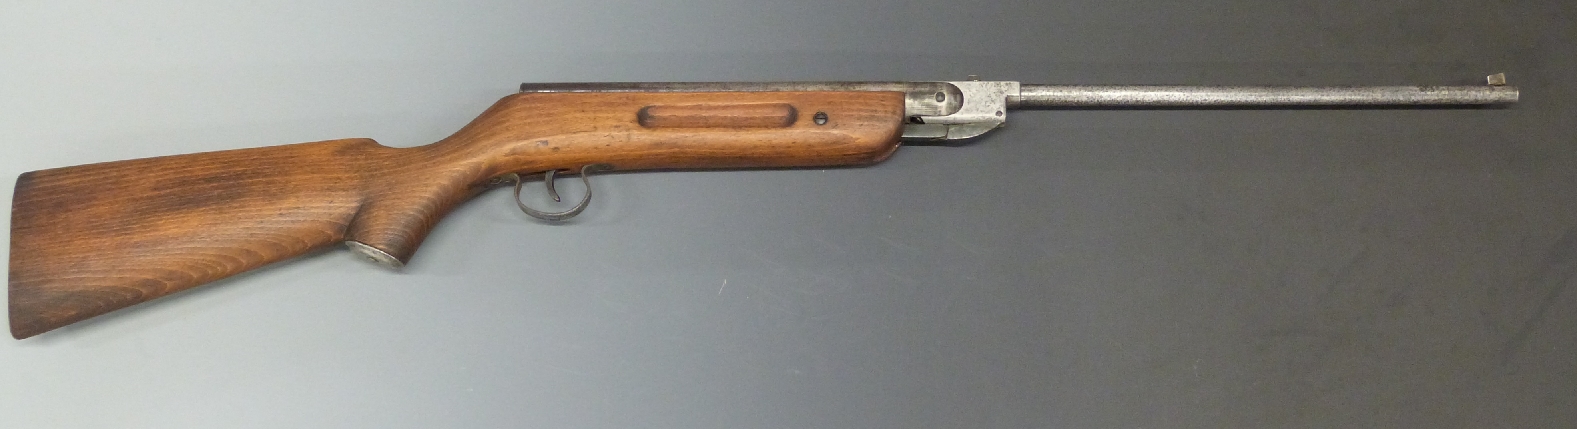 Rellum Telly .22 air rifle with semi-pistol grip, raised cheek piece and metal disk to stock, serial